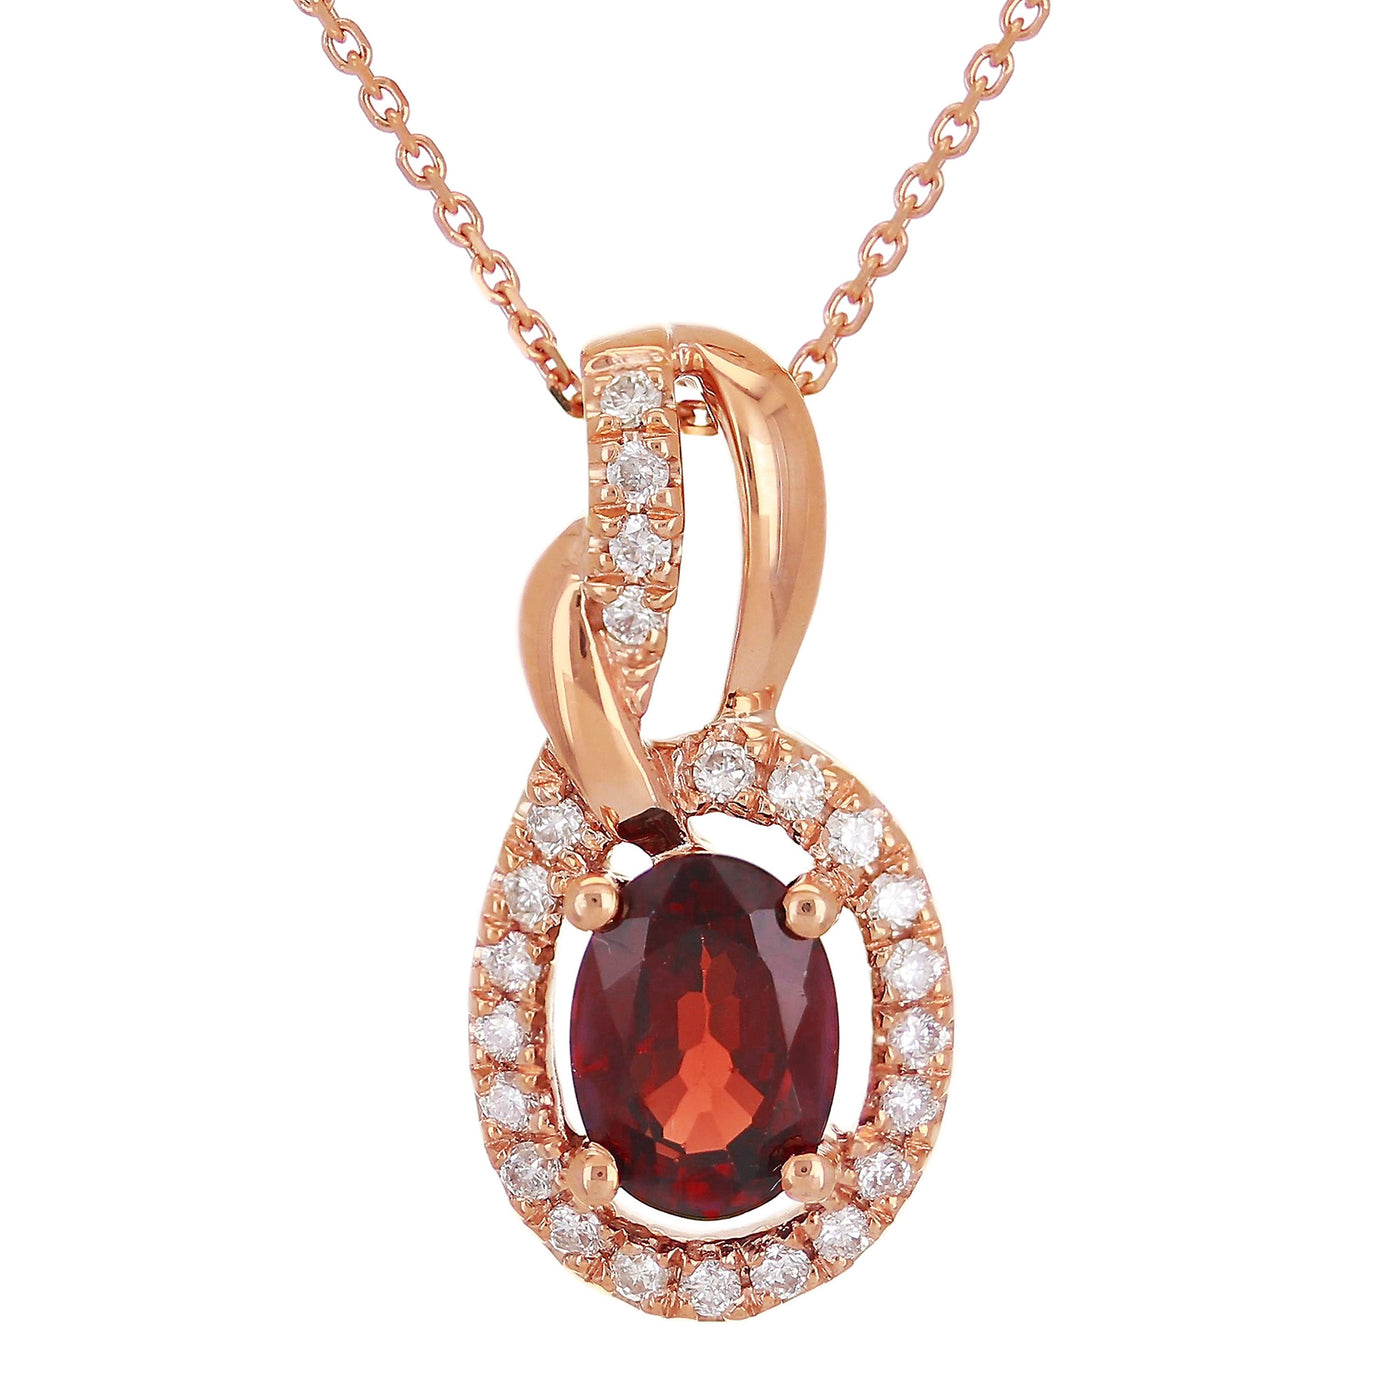 A golden necklace with a gorgeous red ruby stone surrounded by white diamonds.